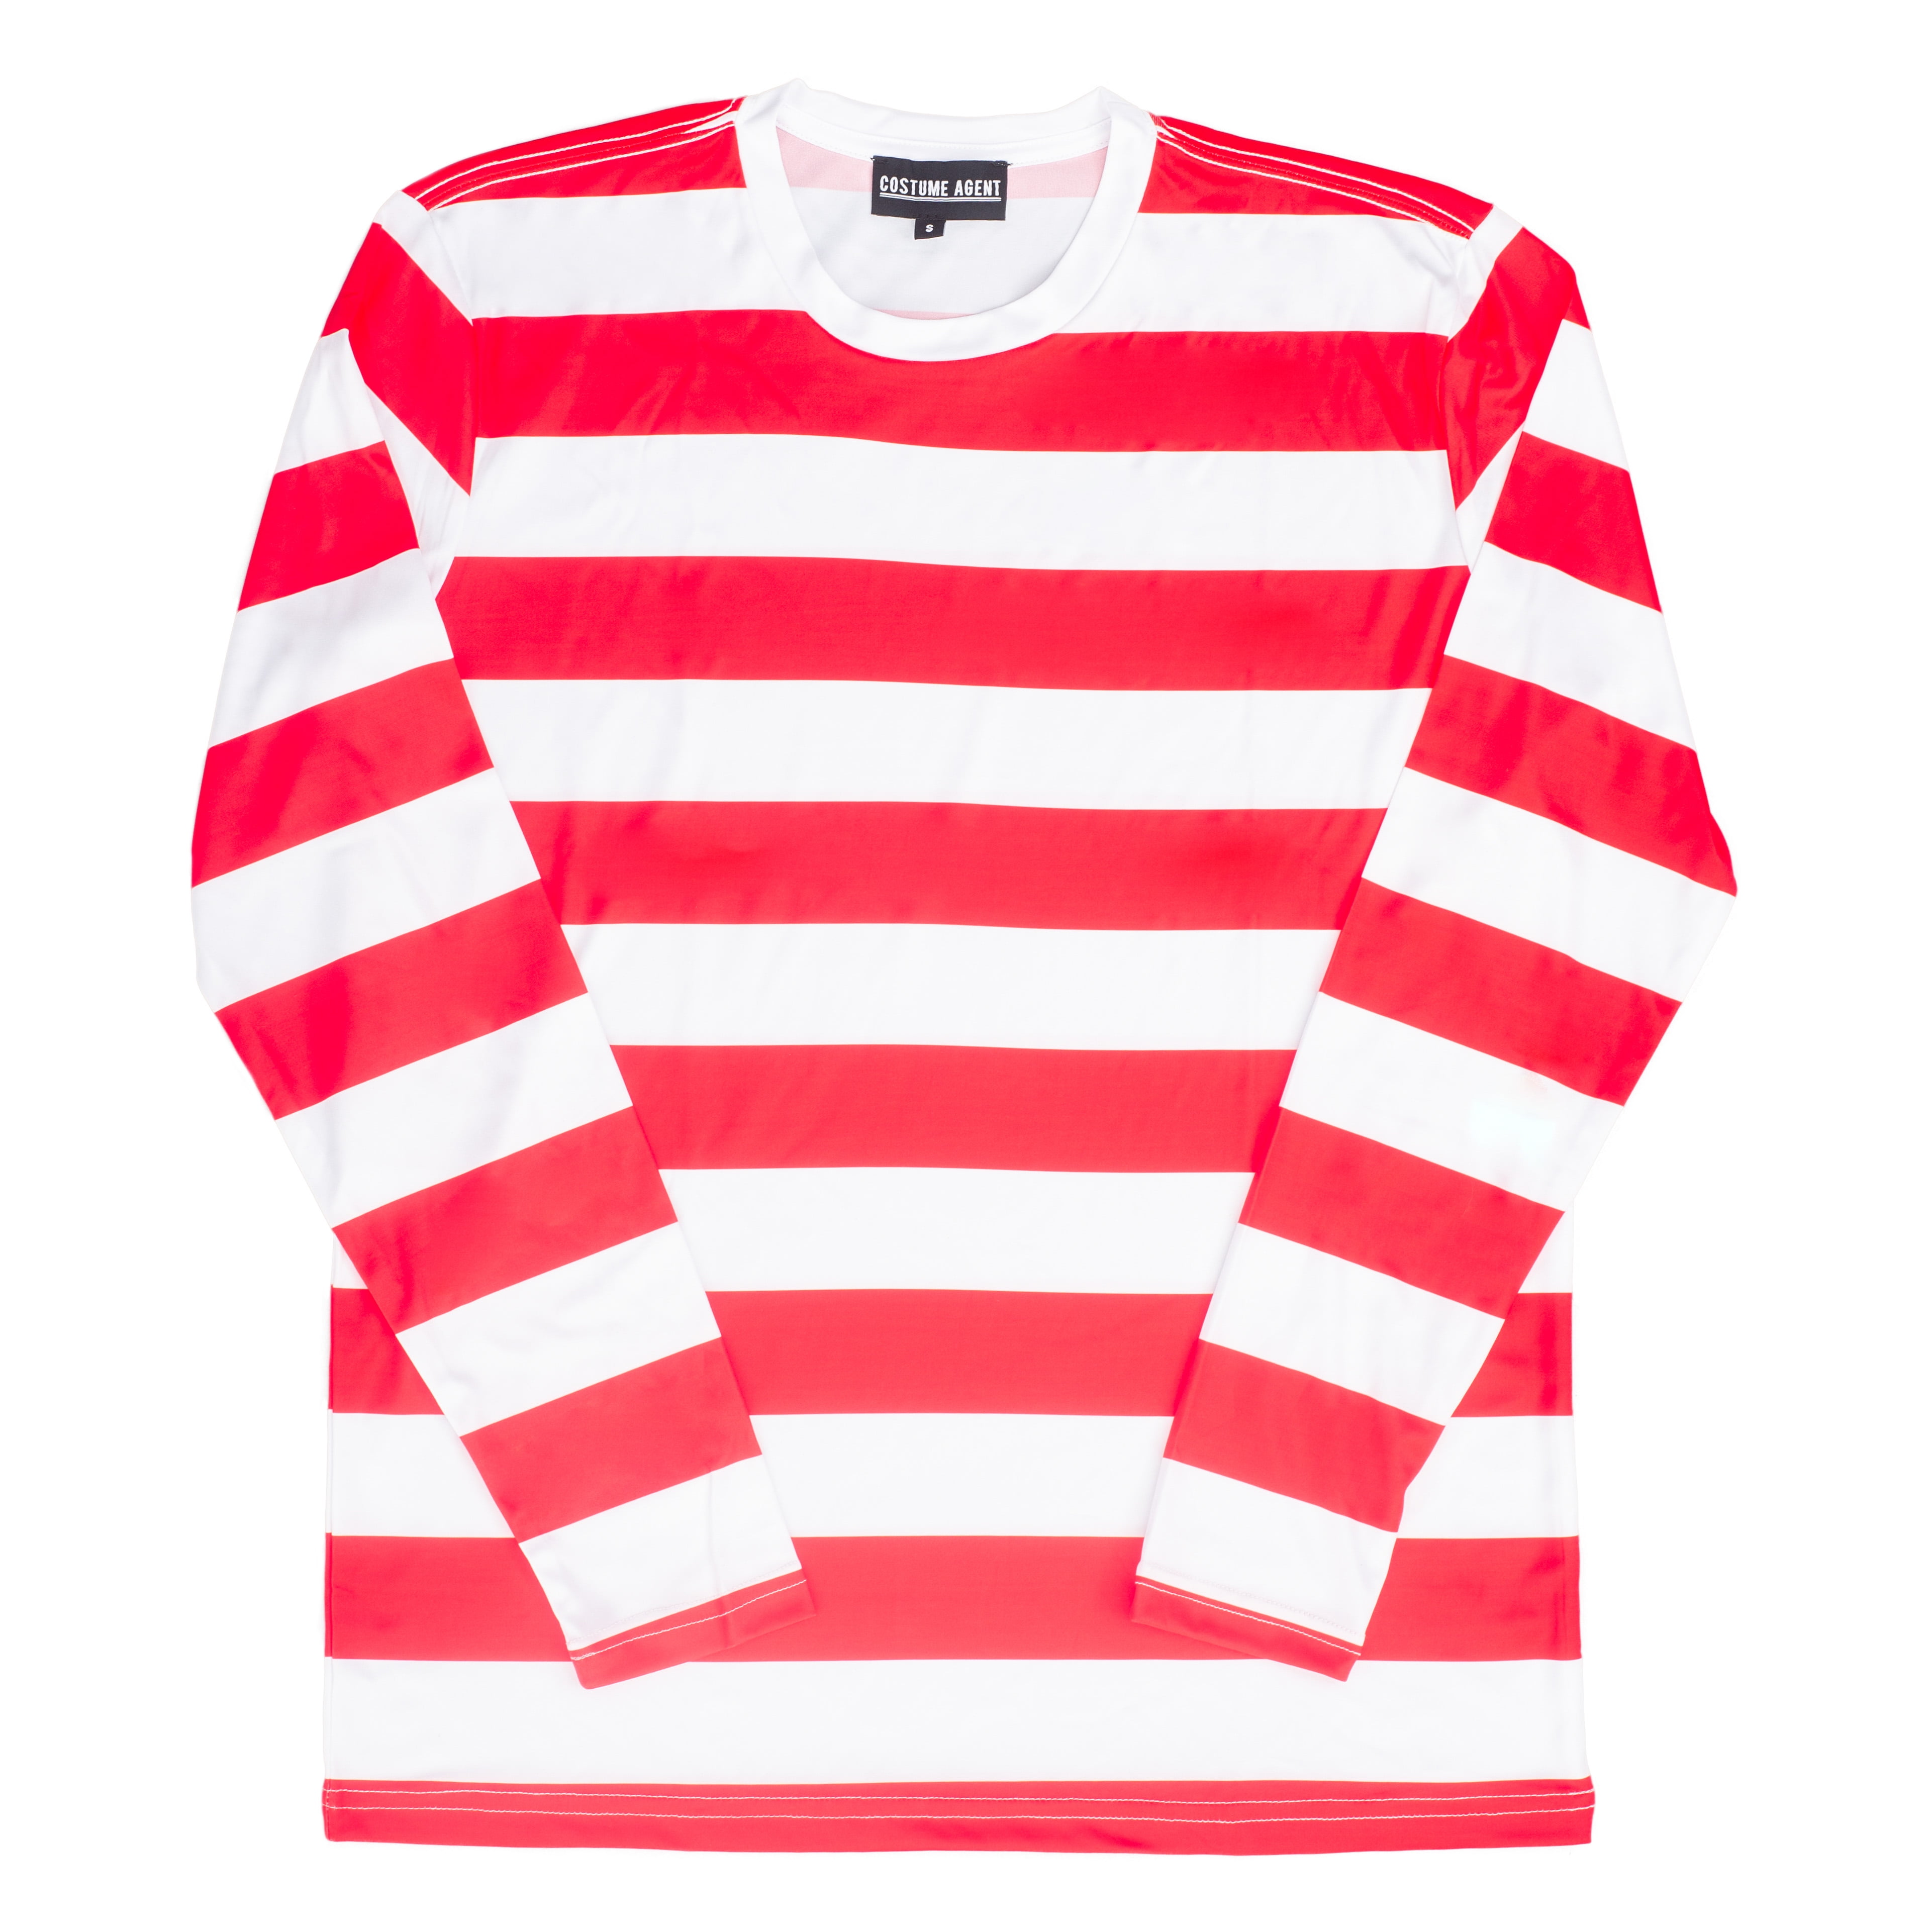 Adult Wheres Waldo Costume Red and White Striped T-Shirt Long Sleeve Wide Stripes Tees Crew Neck Tops